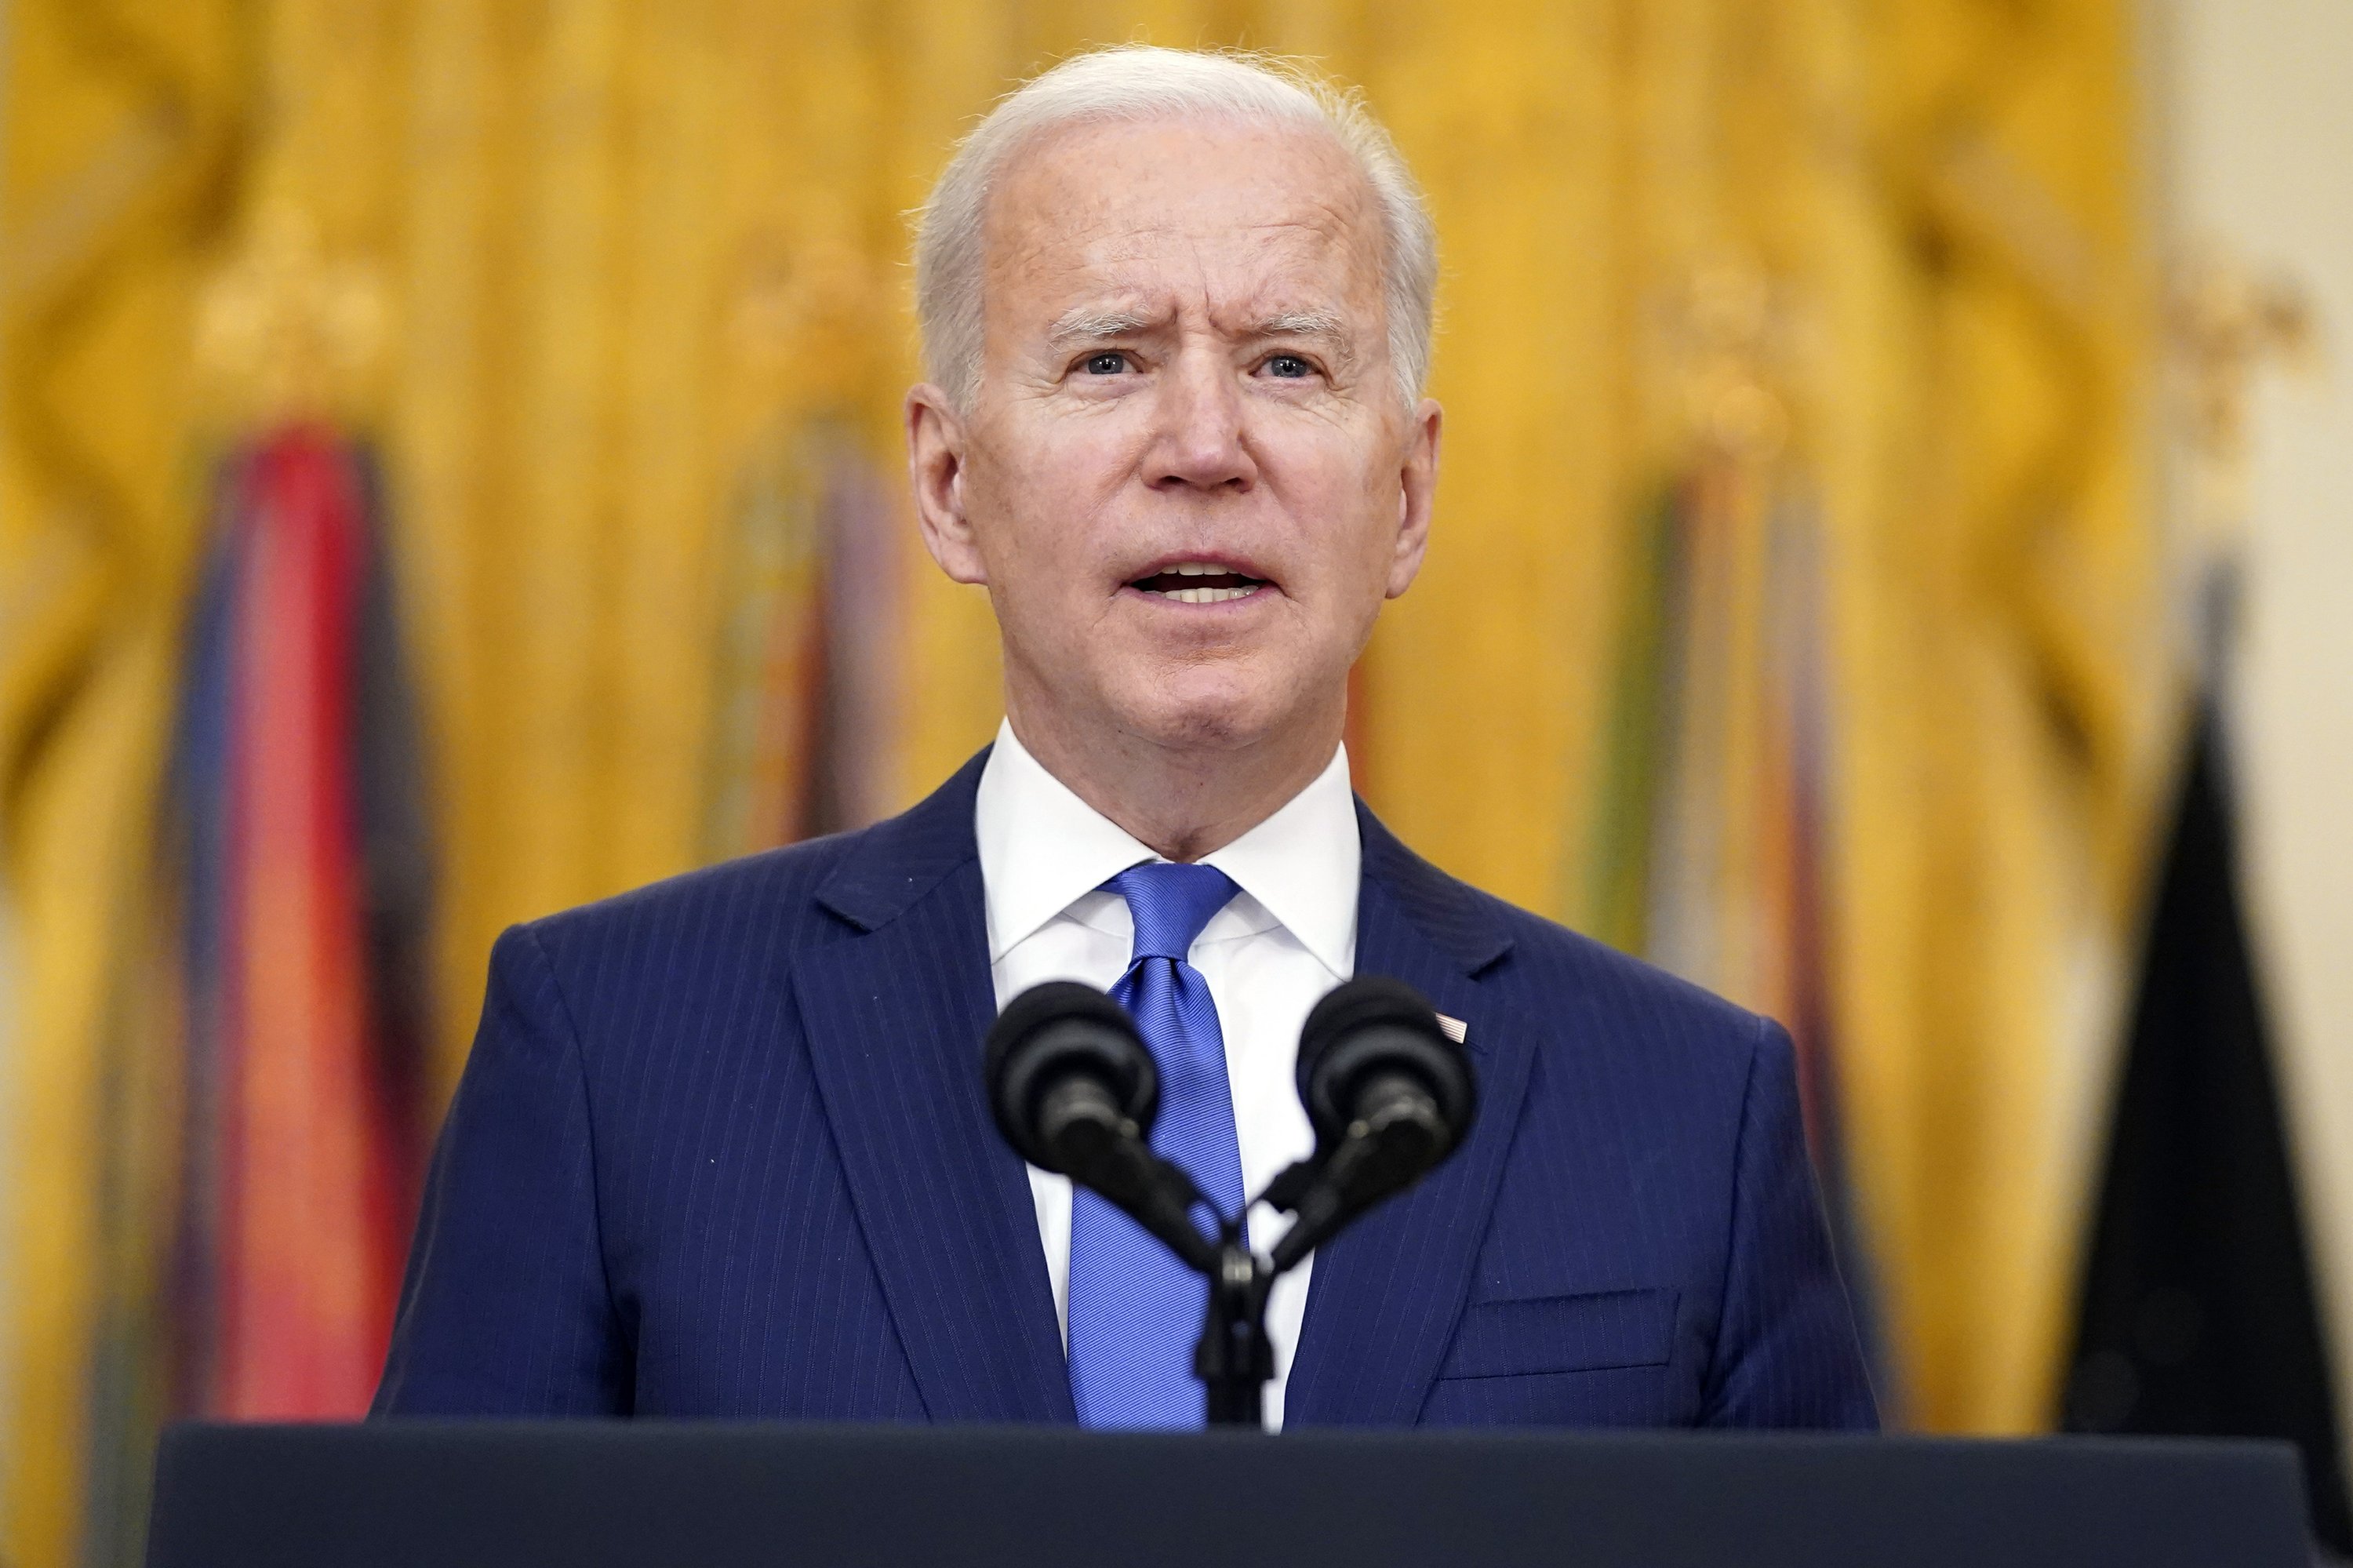 $ 1.9 trillion Biden aid package, a government bet can help heal